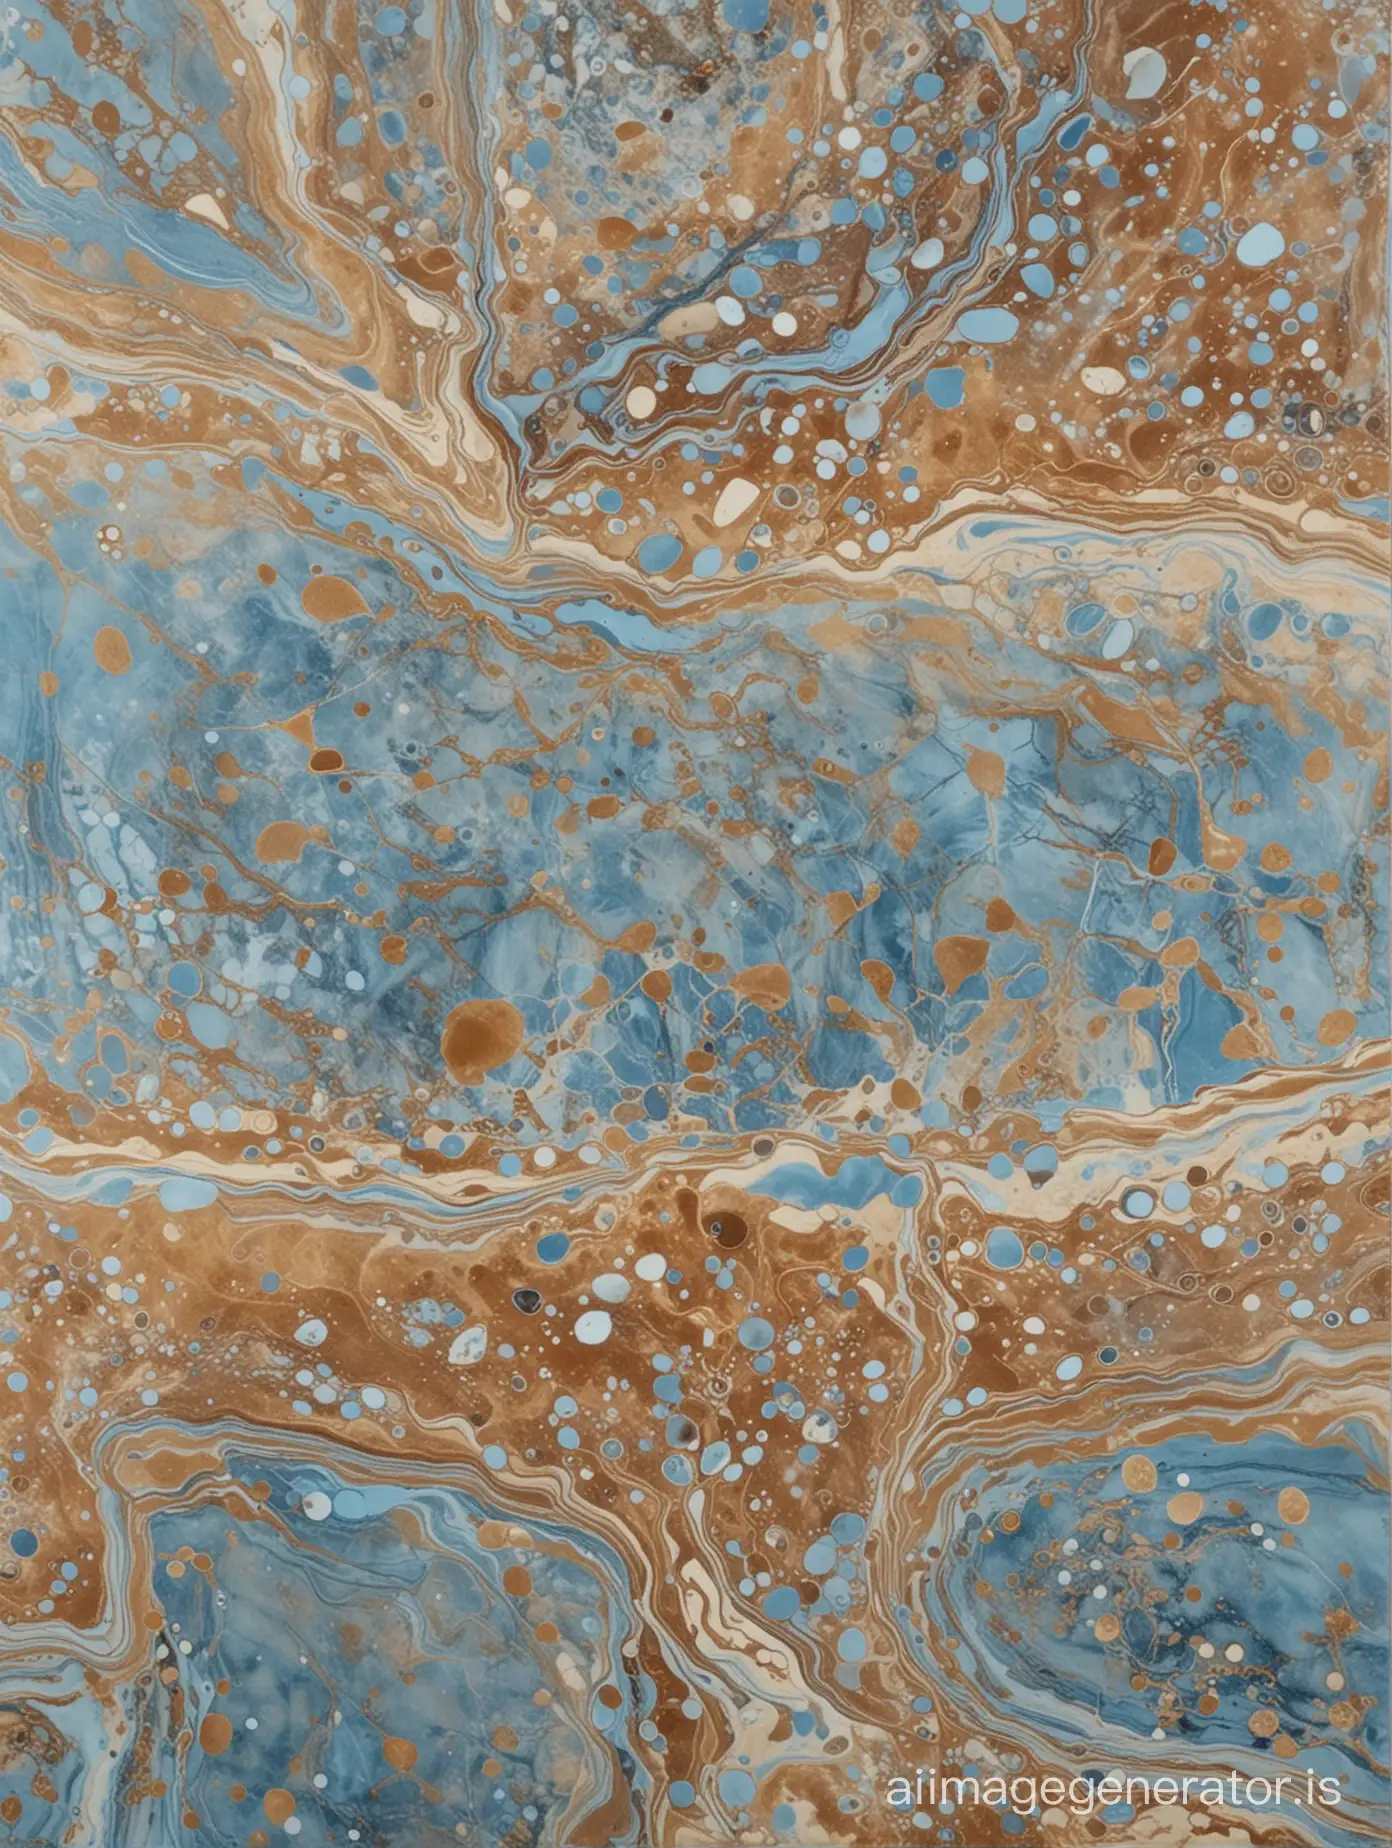 Imitation Onyx in blue, brown, and light brown tones, with spots and a marbled appearance